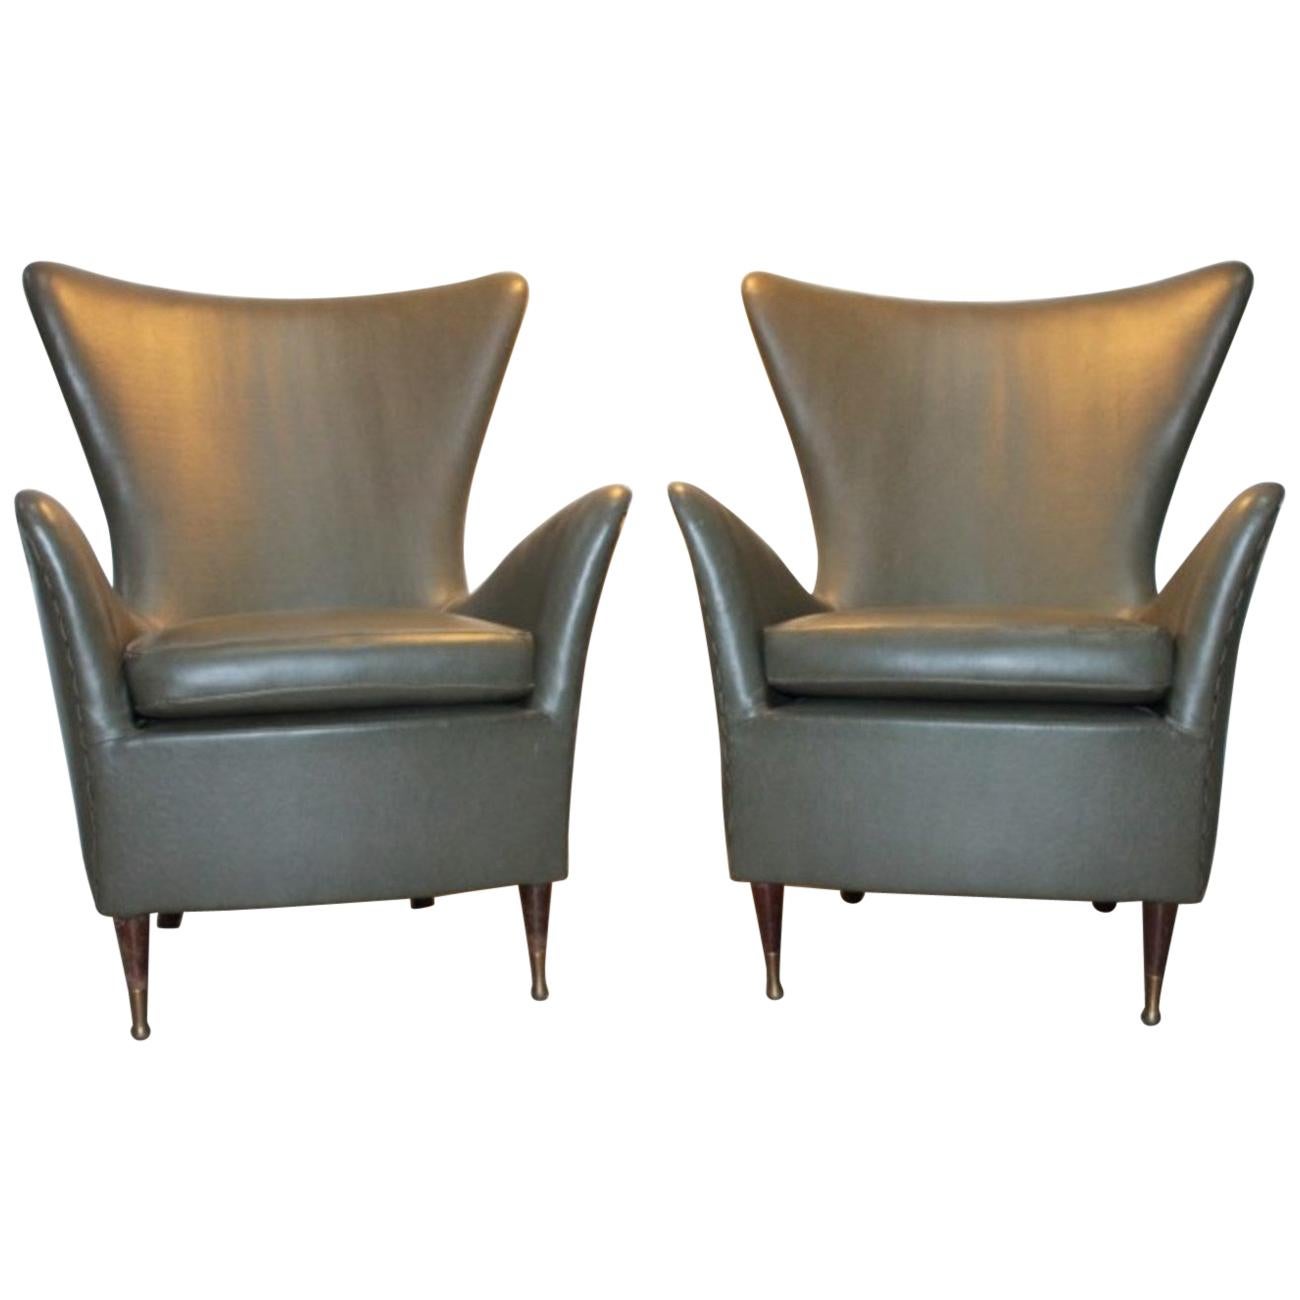 Pair of Armchairs 1950s Design Gio Ponti For Sale